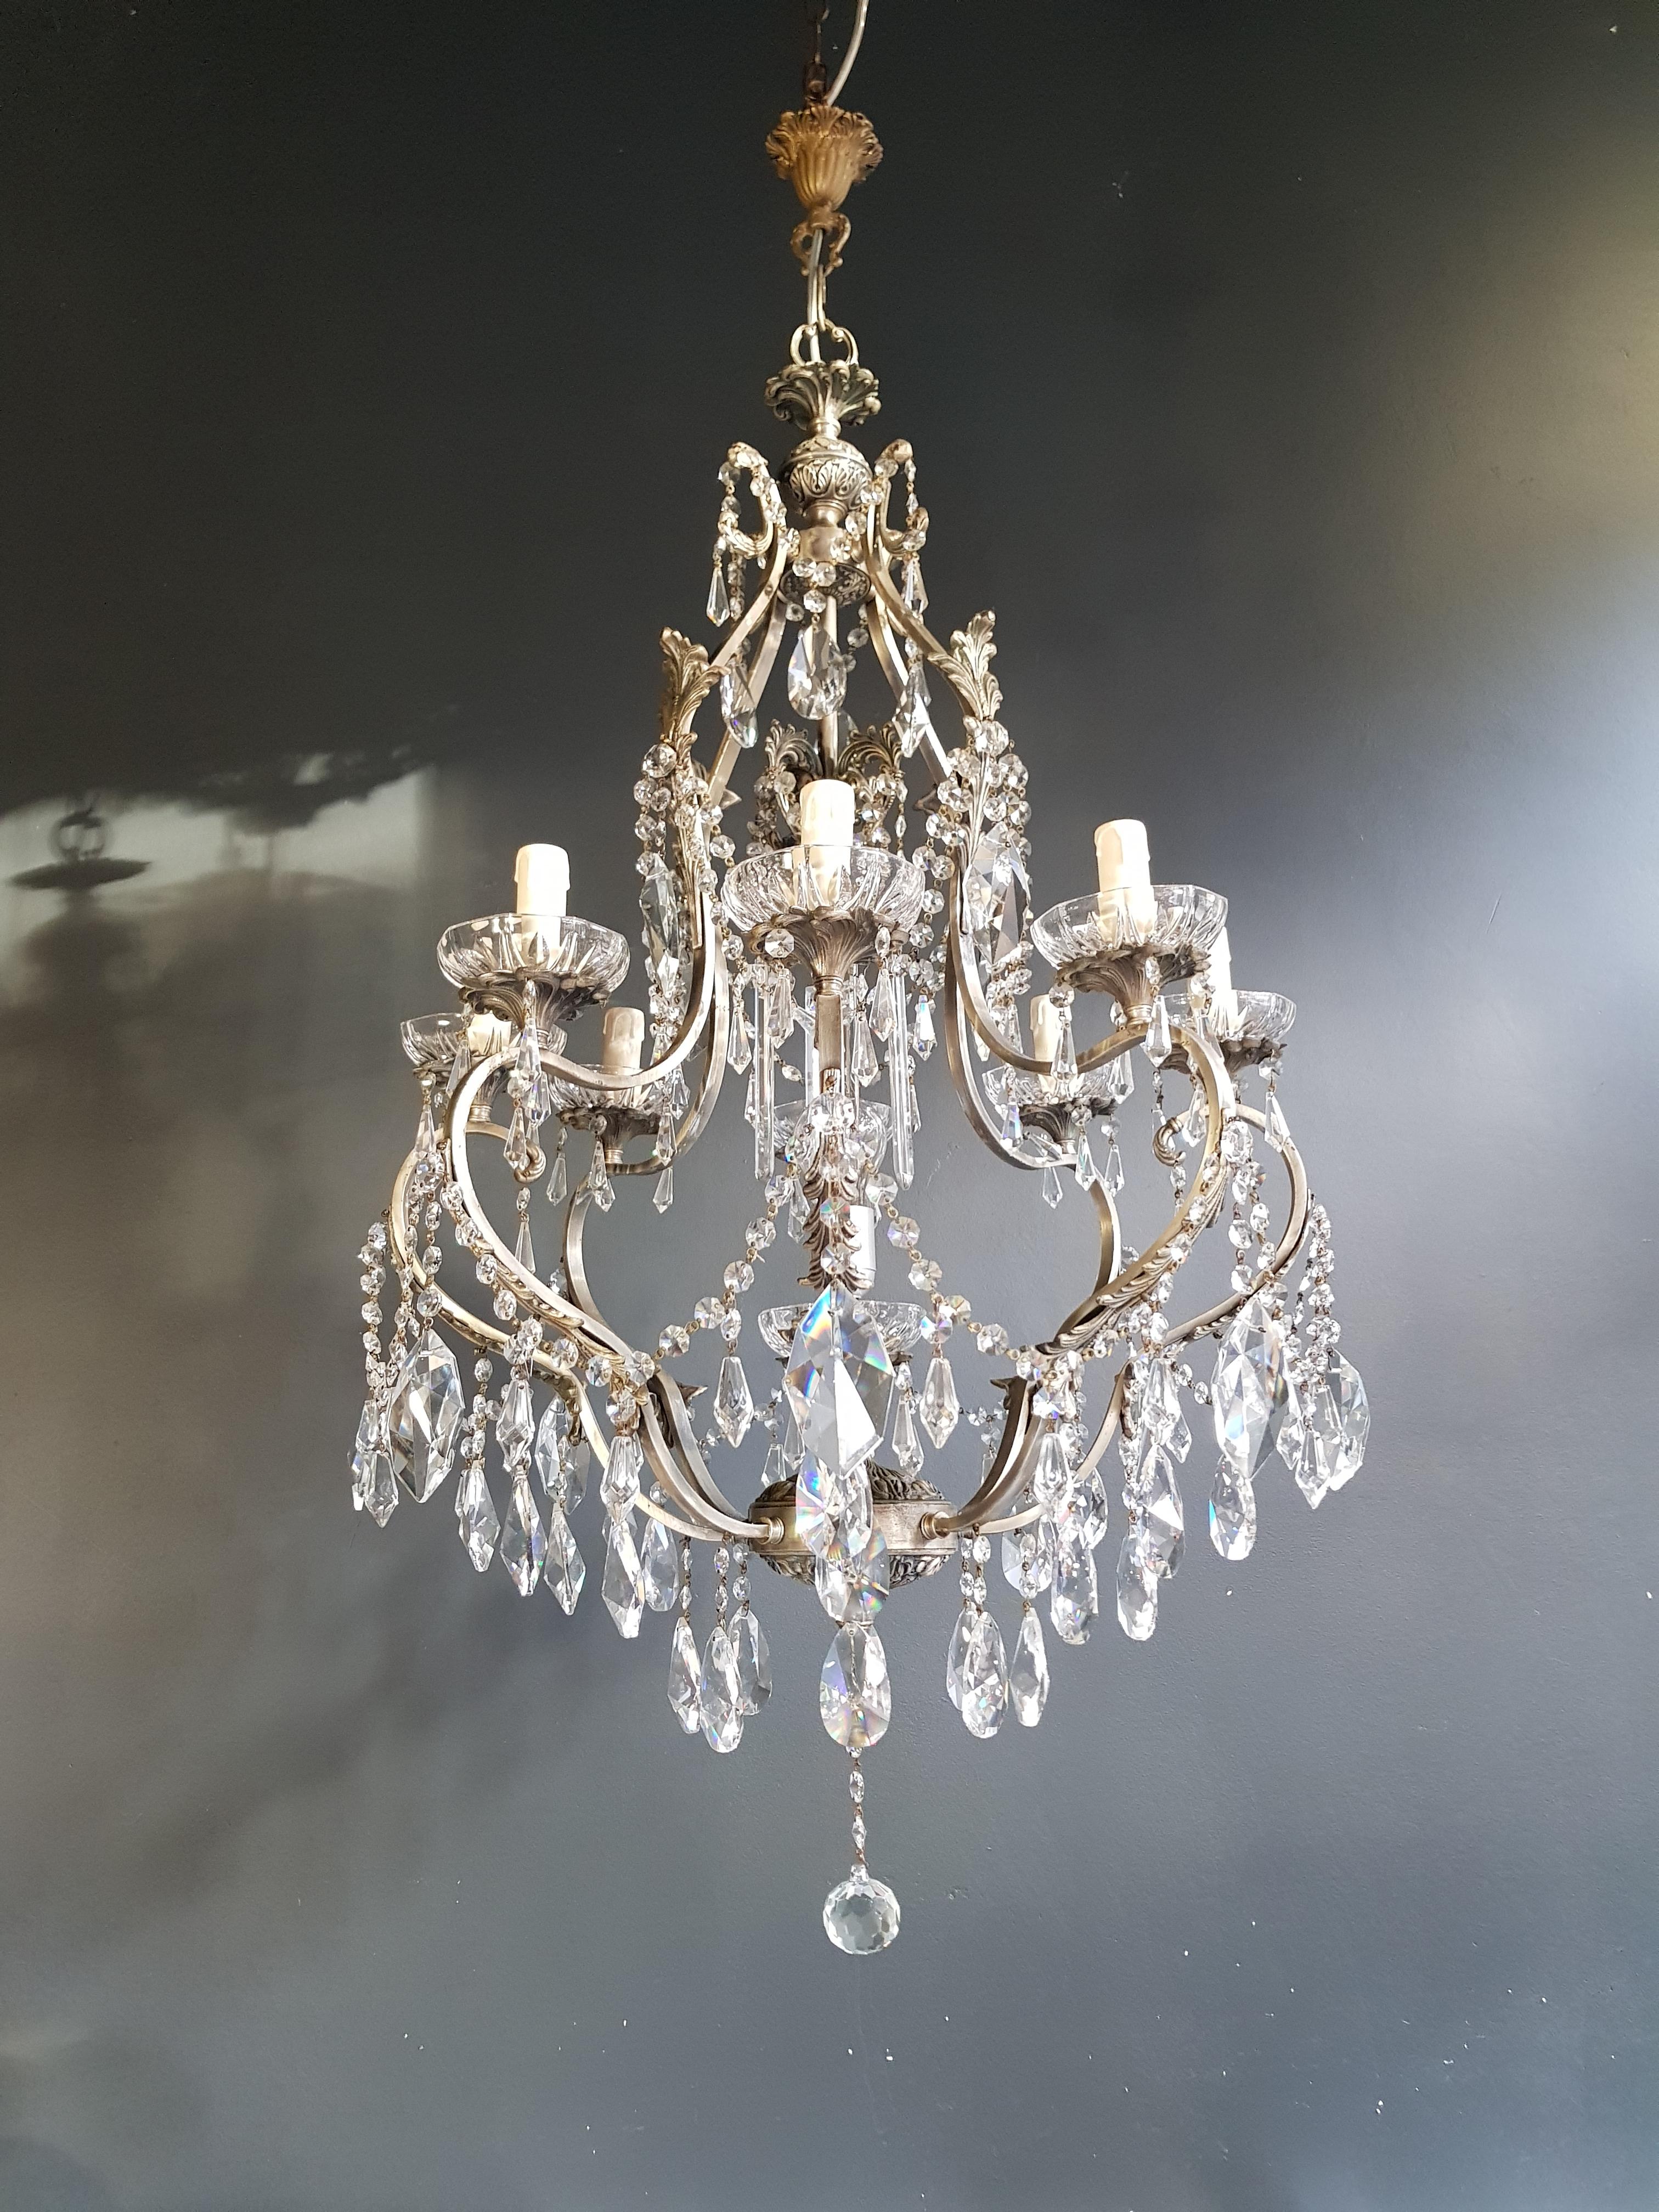 Original preserved chandelier, circa 1950. Cabling and sockets completely renewed. Crystal hand knotted
Measures: Total height: 130 cm, height without chain: 95 cm, diameter 60 cm, weight (approximately) 13 kg.

Number of lights: 9 light bulub